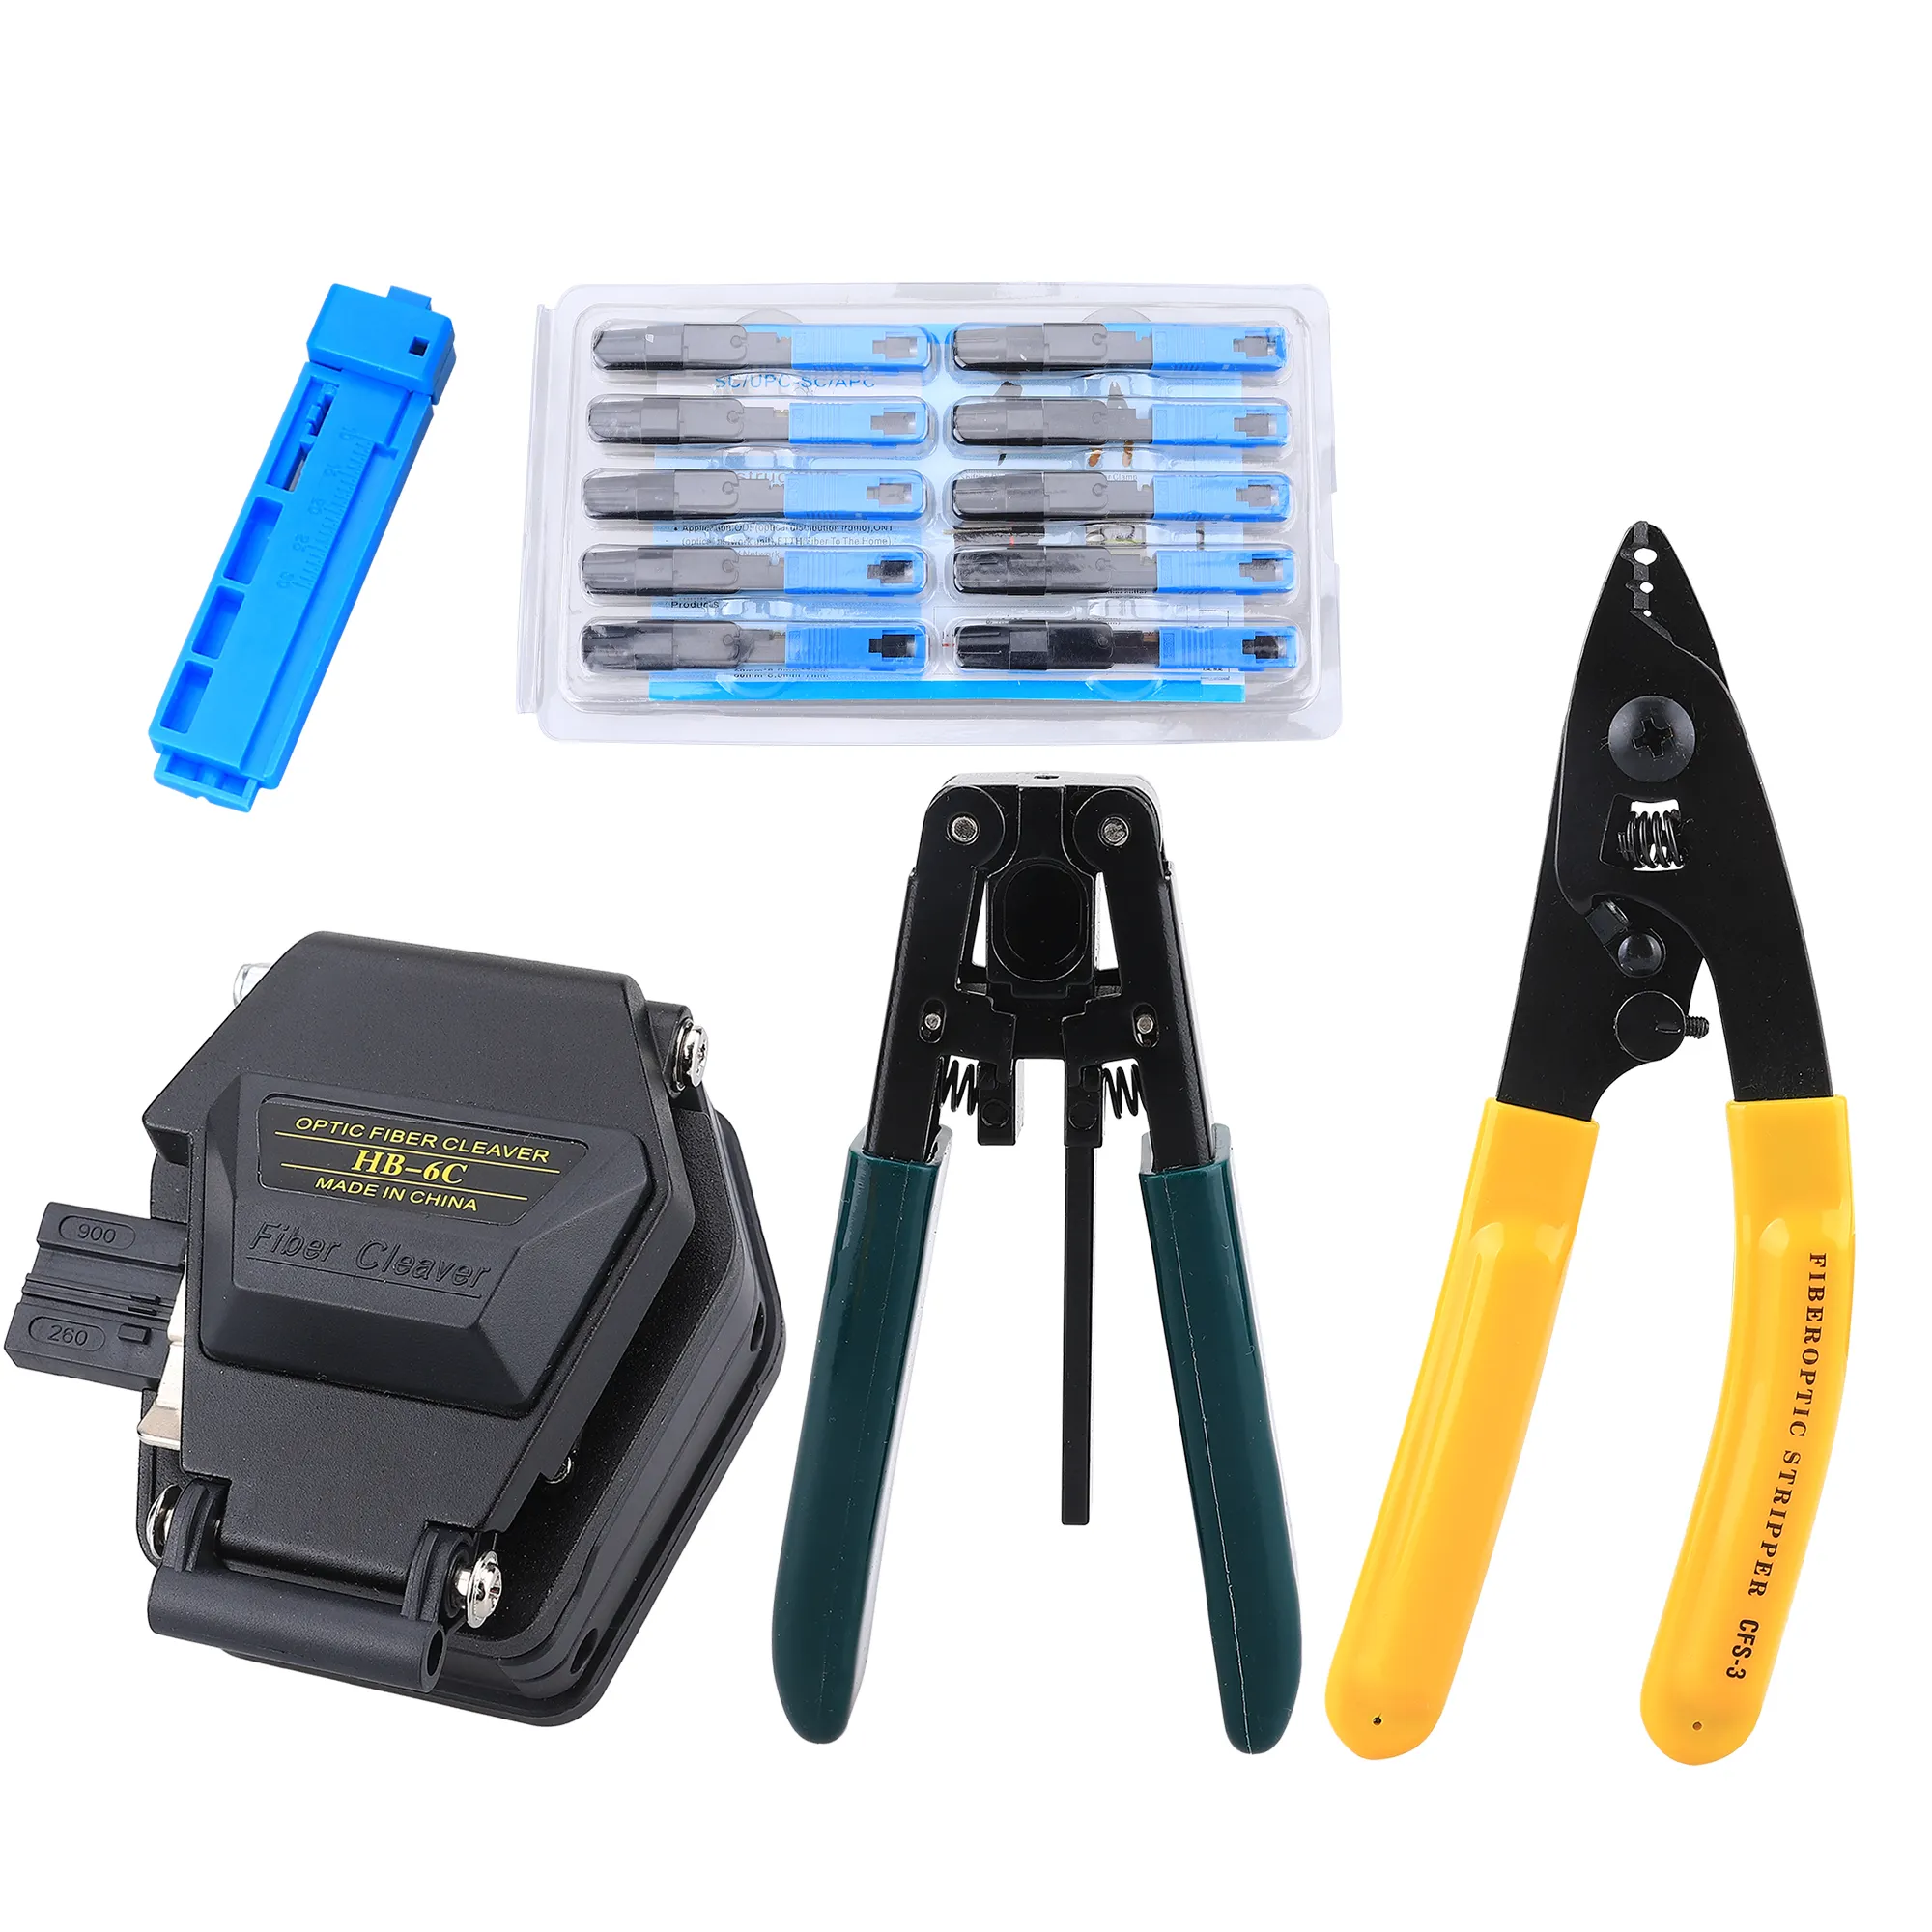 5 in 1 Fiber Optic Tools HB-6C Cleaver CFS-3 Wire stripper Leather Cable Stripping Guide Rails Fixed-length SC/UPC Quick Coupler